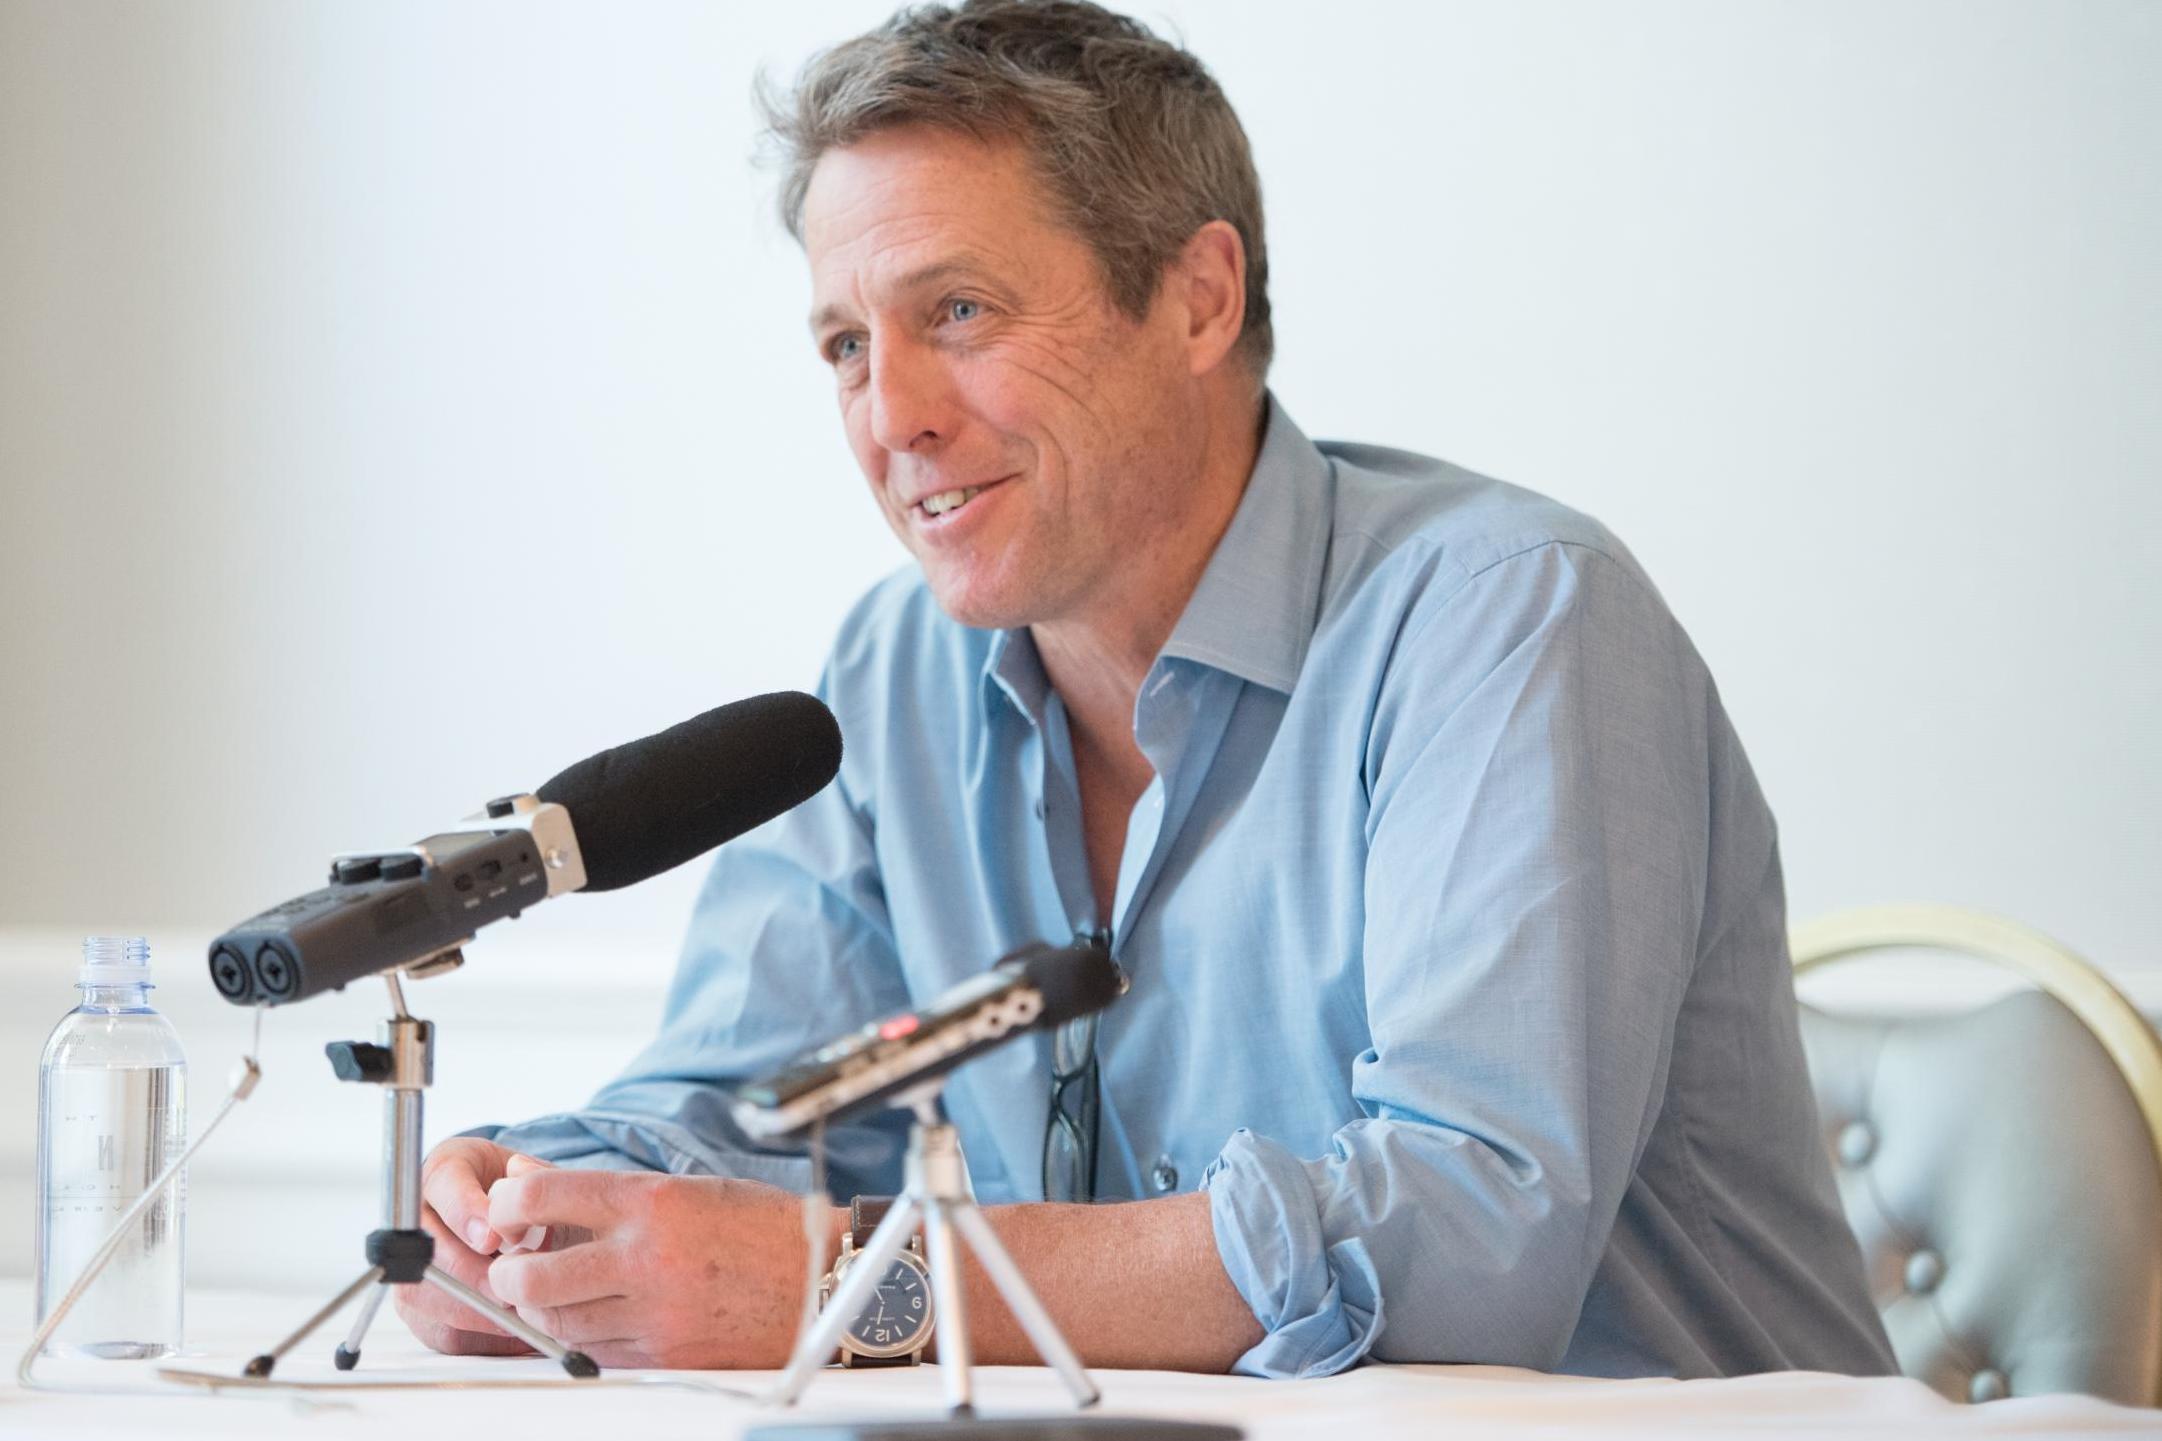 Hugh Grant speaks at a Press Conference For "A Very English Scandal" at The London West Hollywood on 17 October, 2018 in West Hollywood, California.